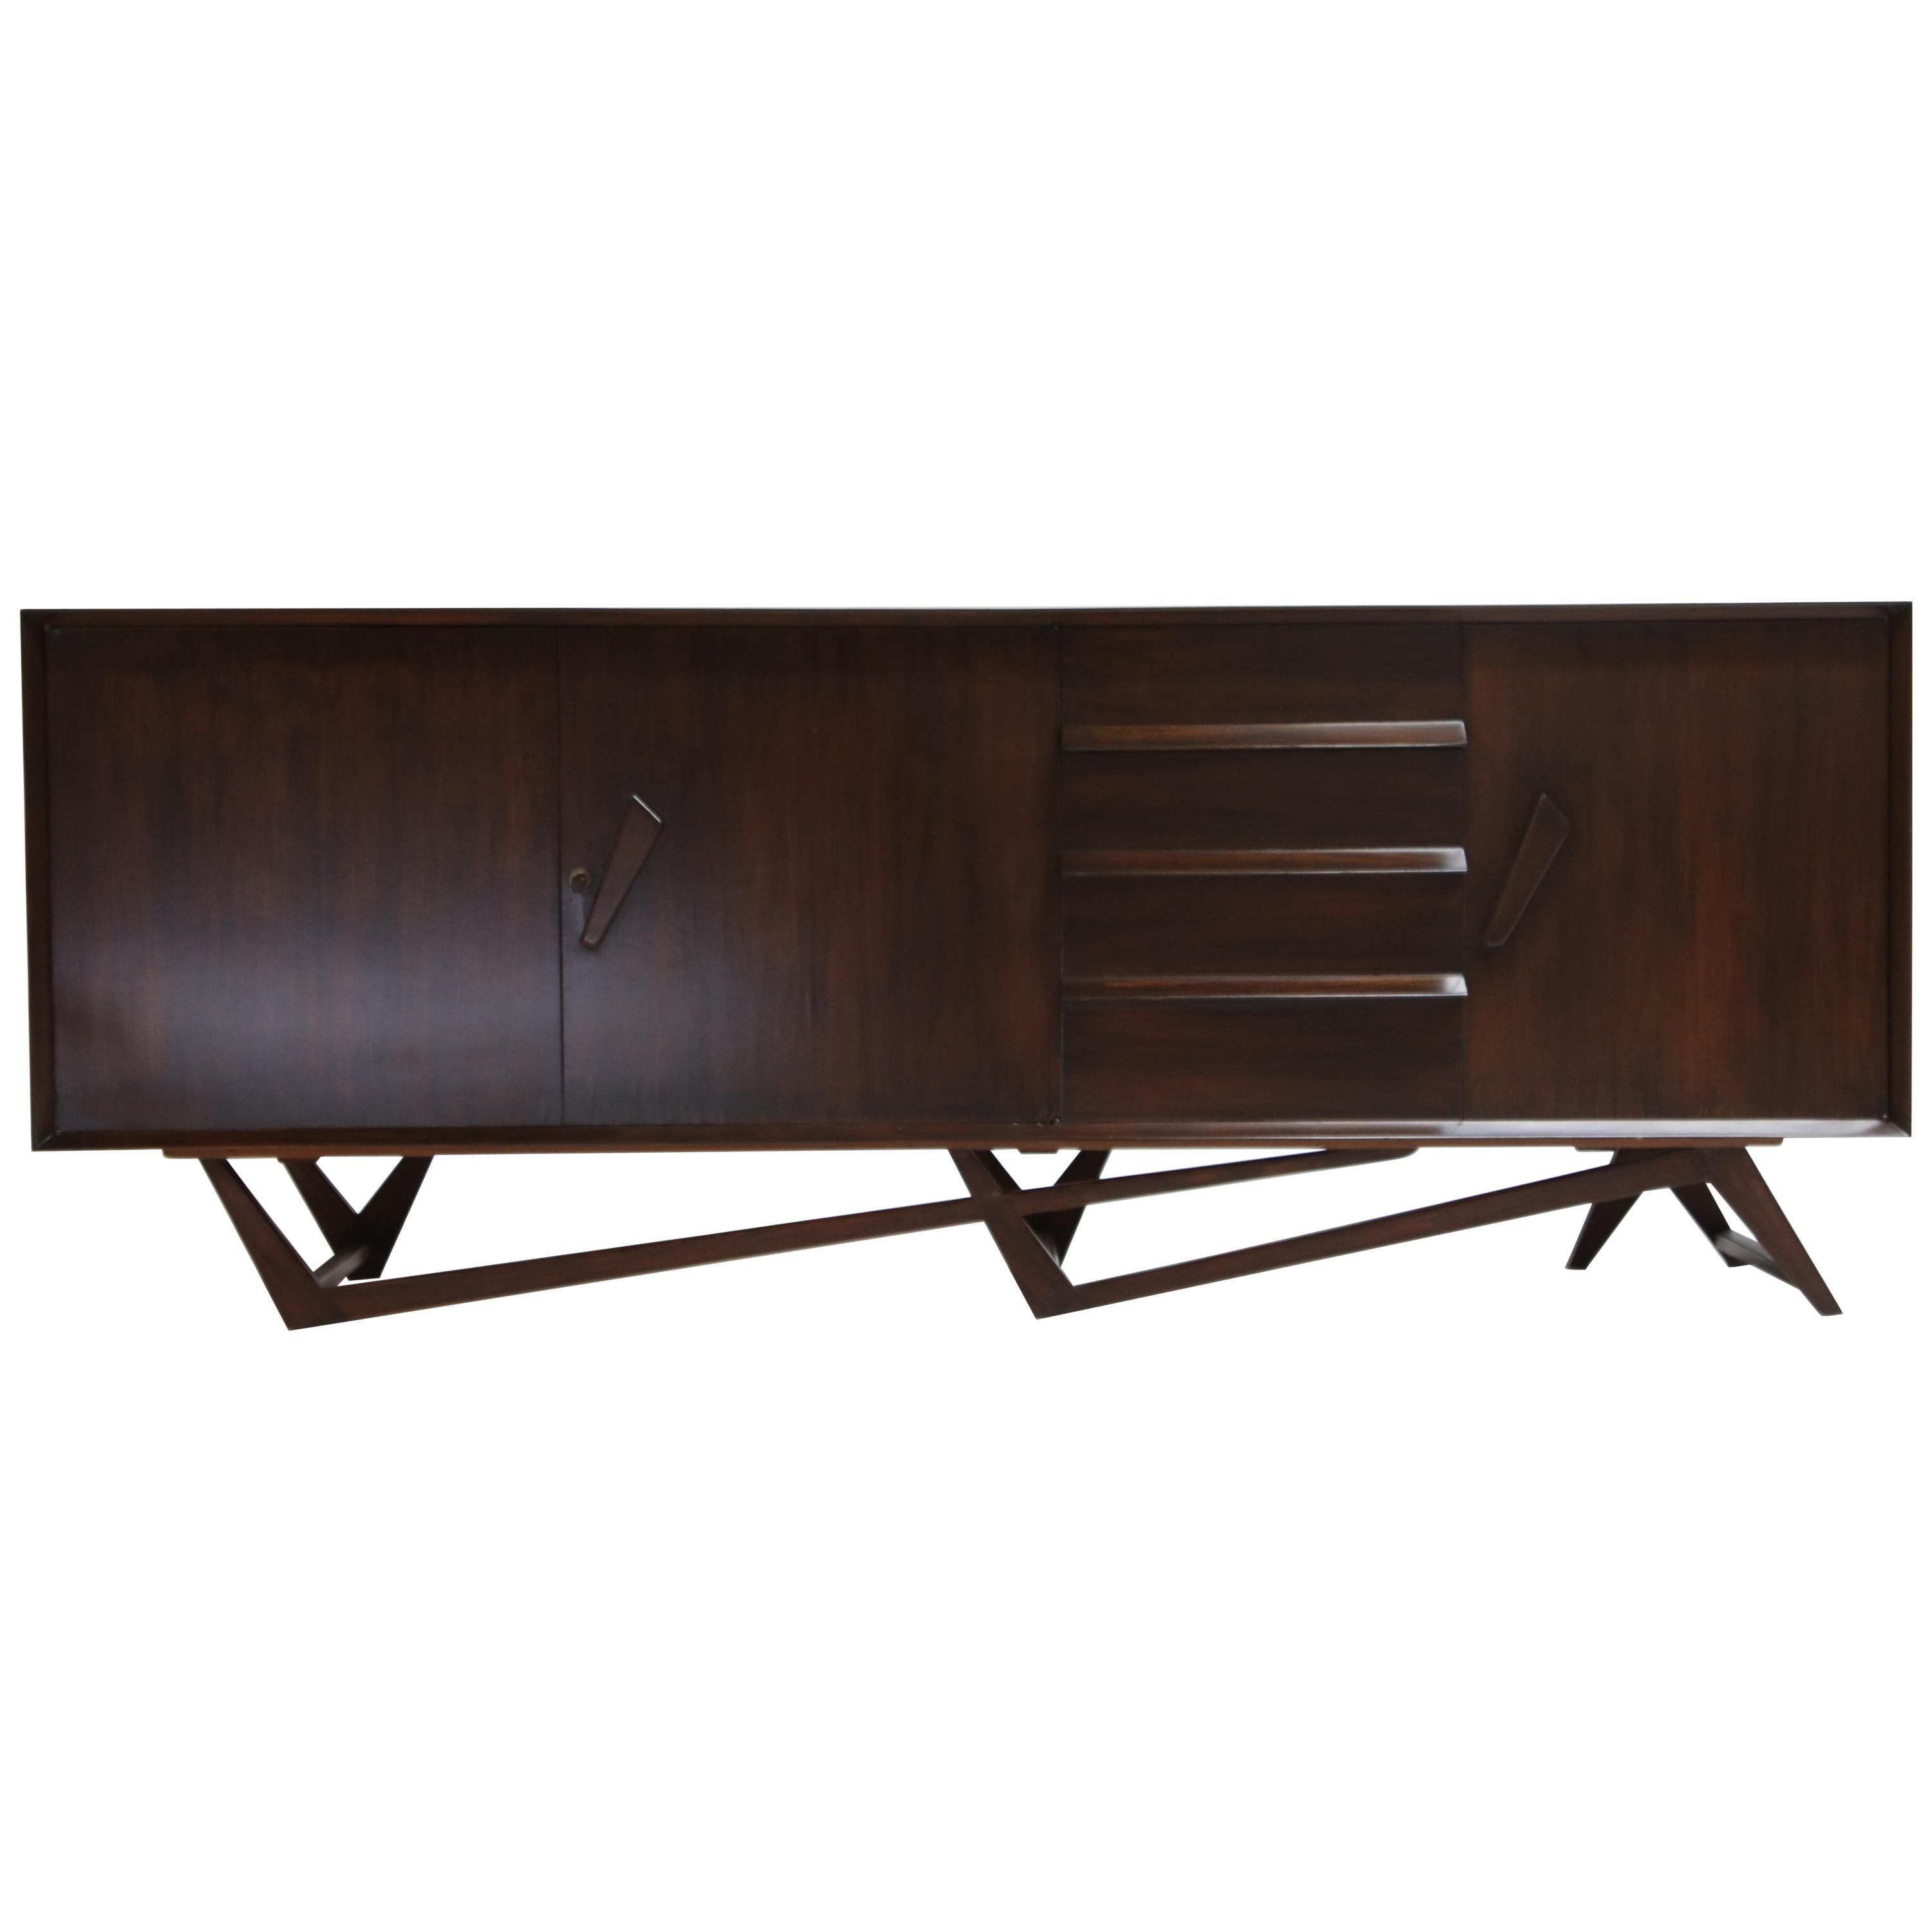 Giuseppe Scapinelli Brazilian Rosewood Architectural Sideboard, Brazil, 1950s